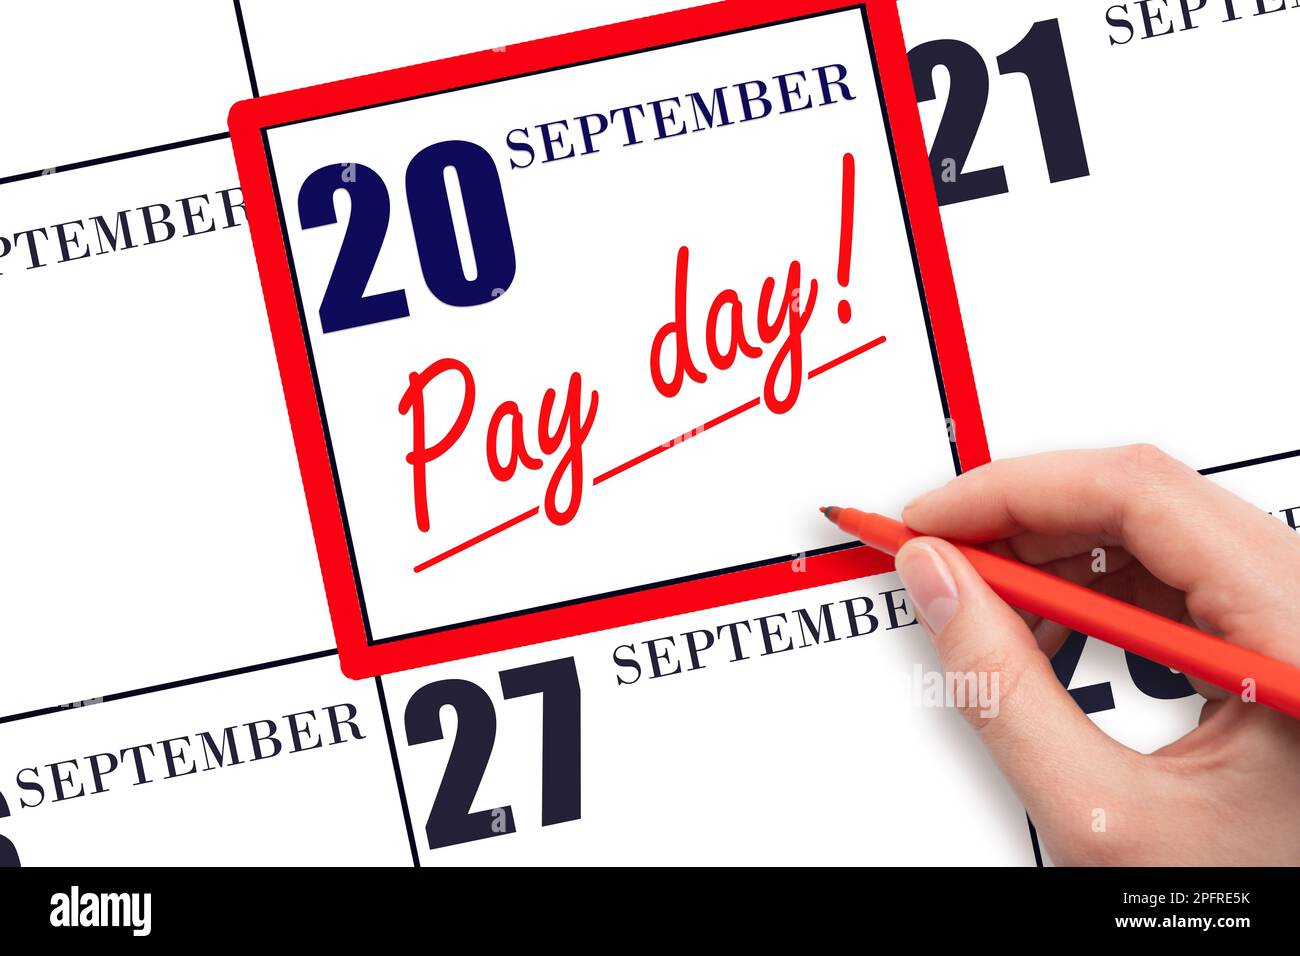 20th day of September. Hand writing text PAY DATE on calendar date September  20 and underline it. Payment due date.  Reminder concept of payment. Aut Stock Photo